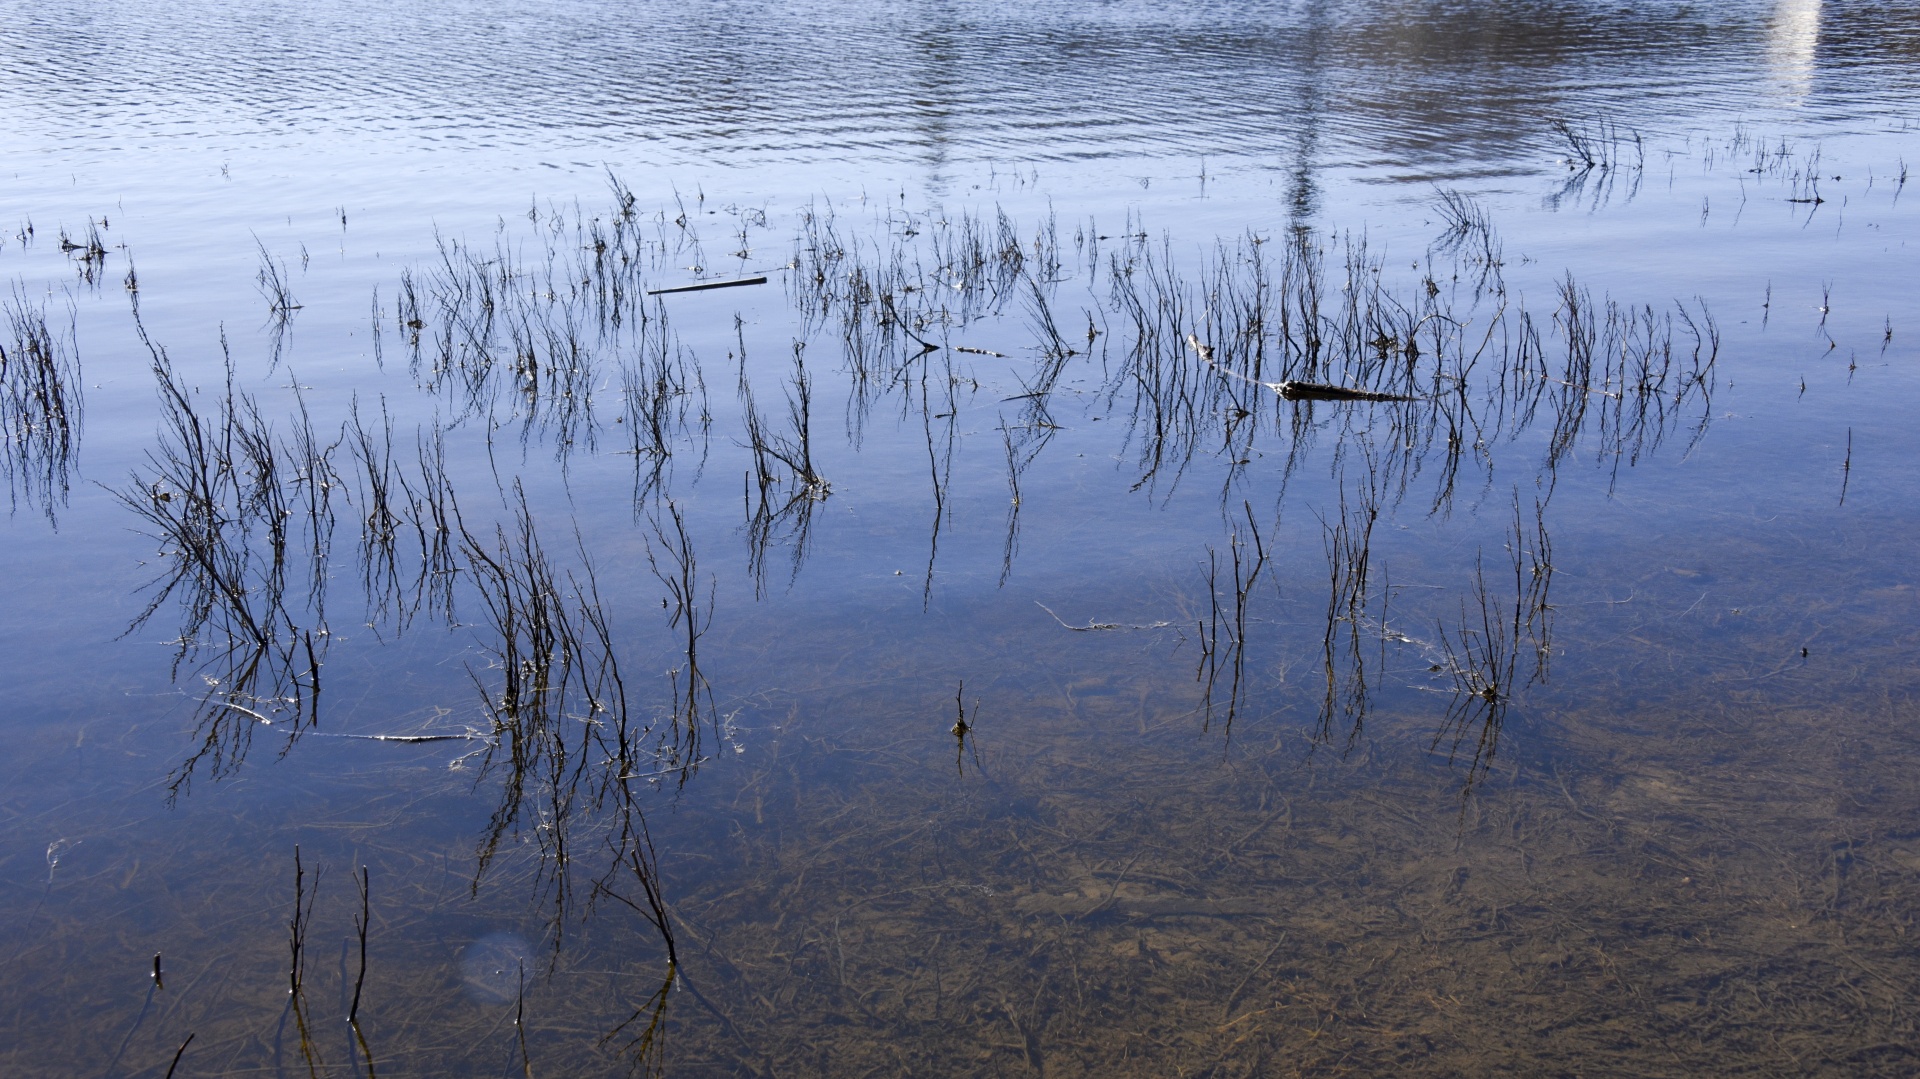 lake,reed,water,peaceful,blue,ripples,colorful,lake water and reeds,free pictures, free photos, free images, royalty free, free illustrations, public domain